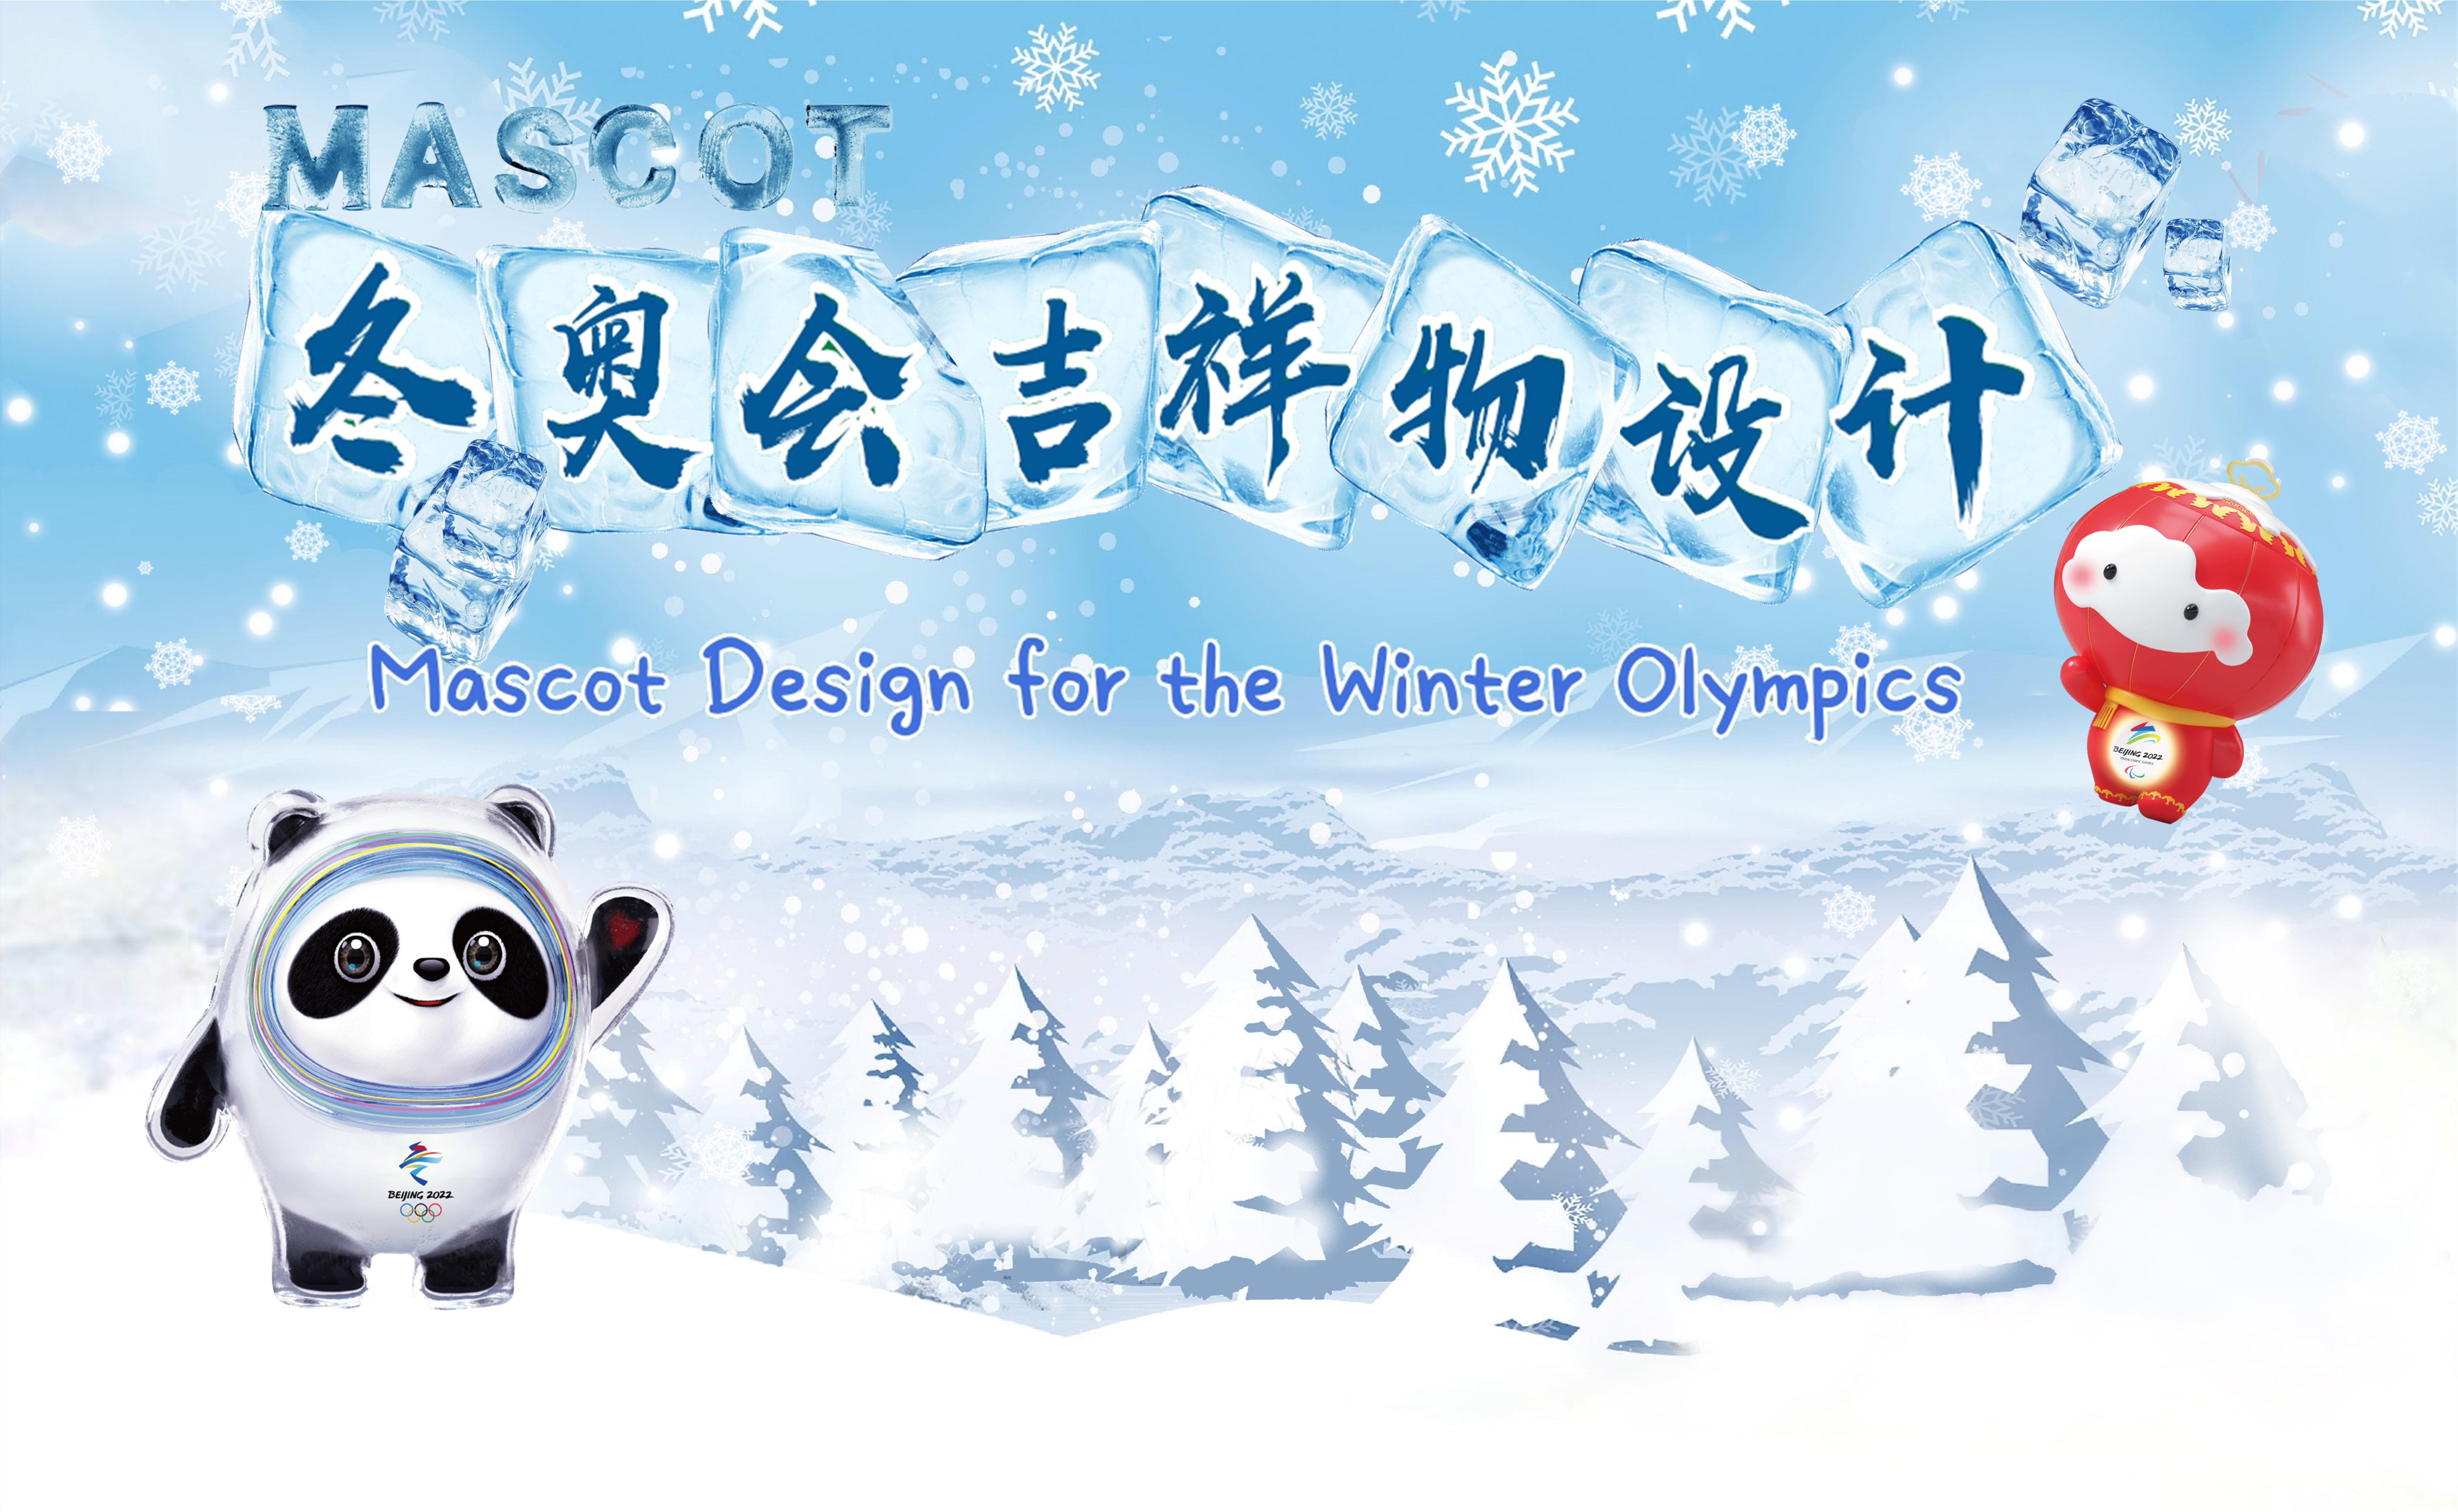 Mascot Design for the Winter Olympics